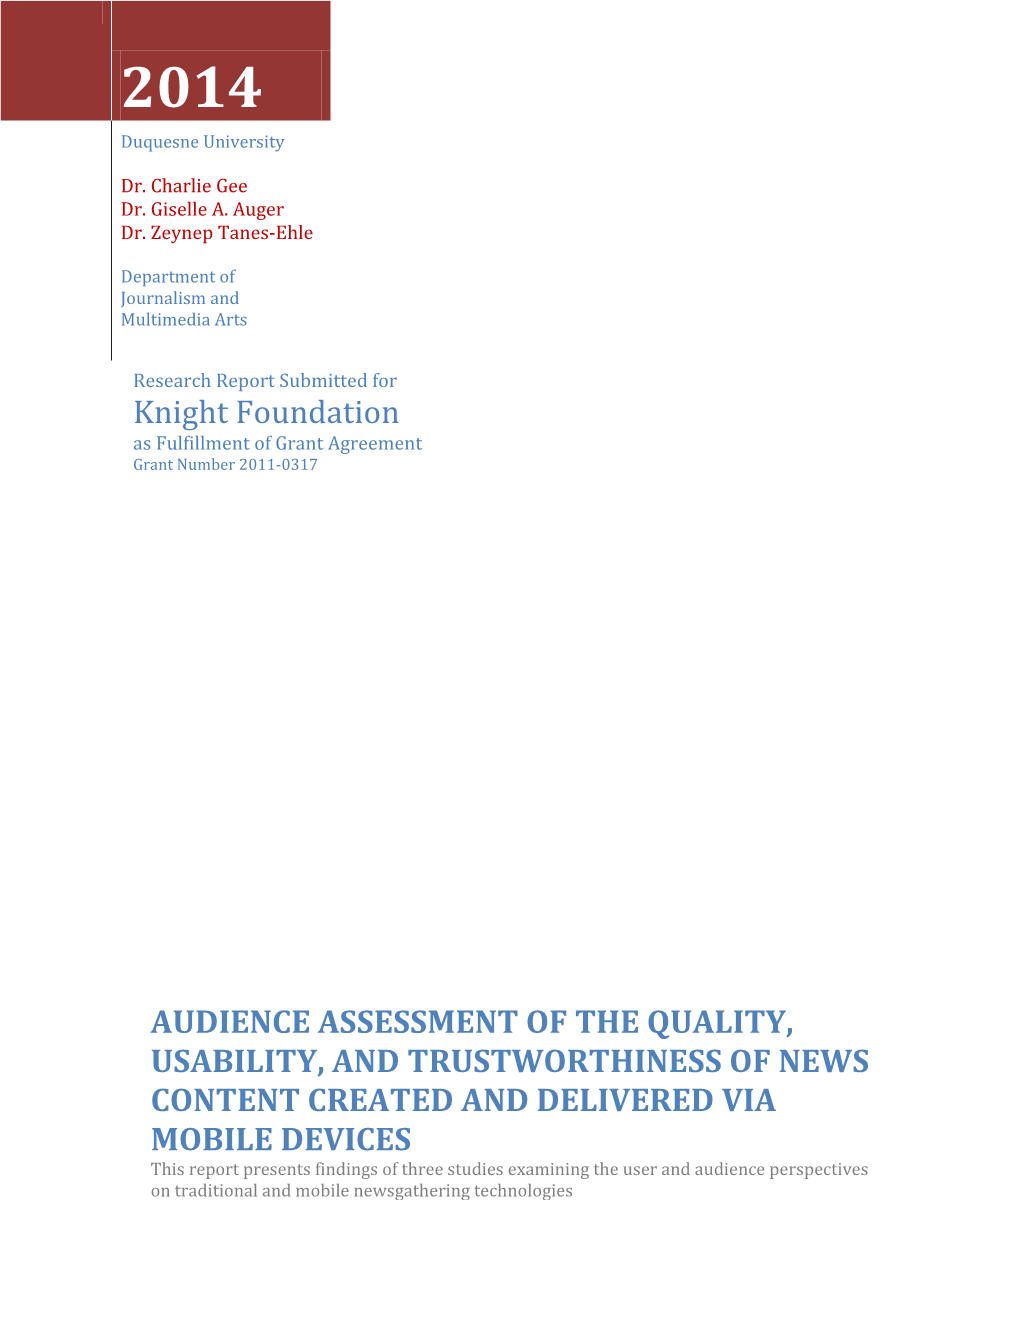 Audience Assessment of the Quality, Usability, and Trustworthiness Of